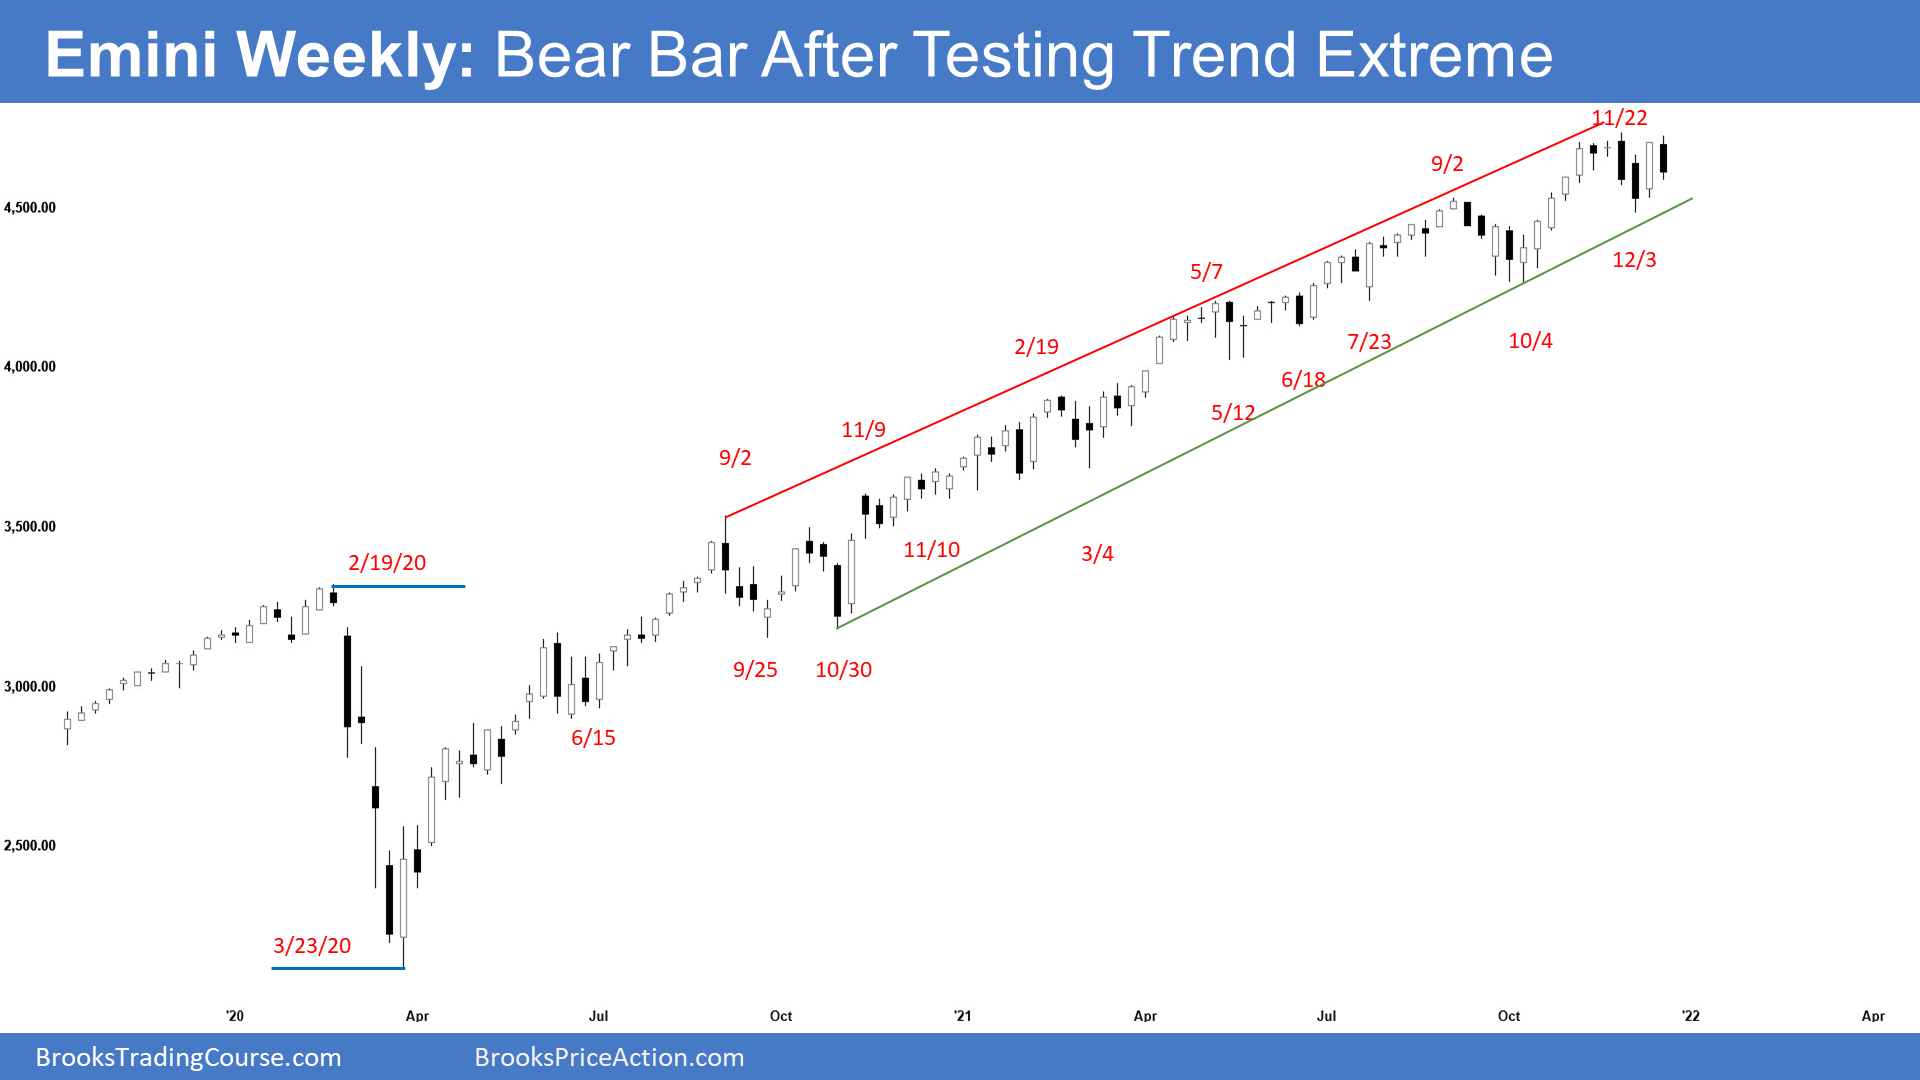 SP500 Emini Weekly chart bear bar after testing trend extreme. The Emini is in middle of 7-week trading range with 2 weeks remaining in 2021.